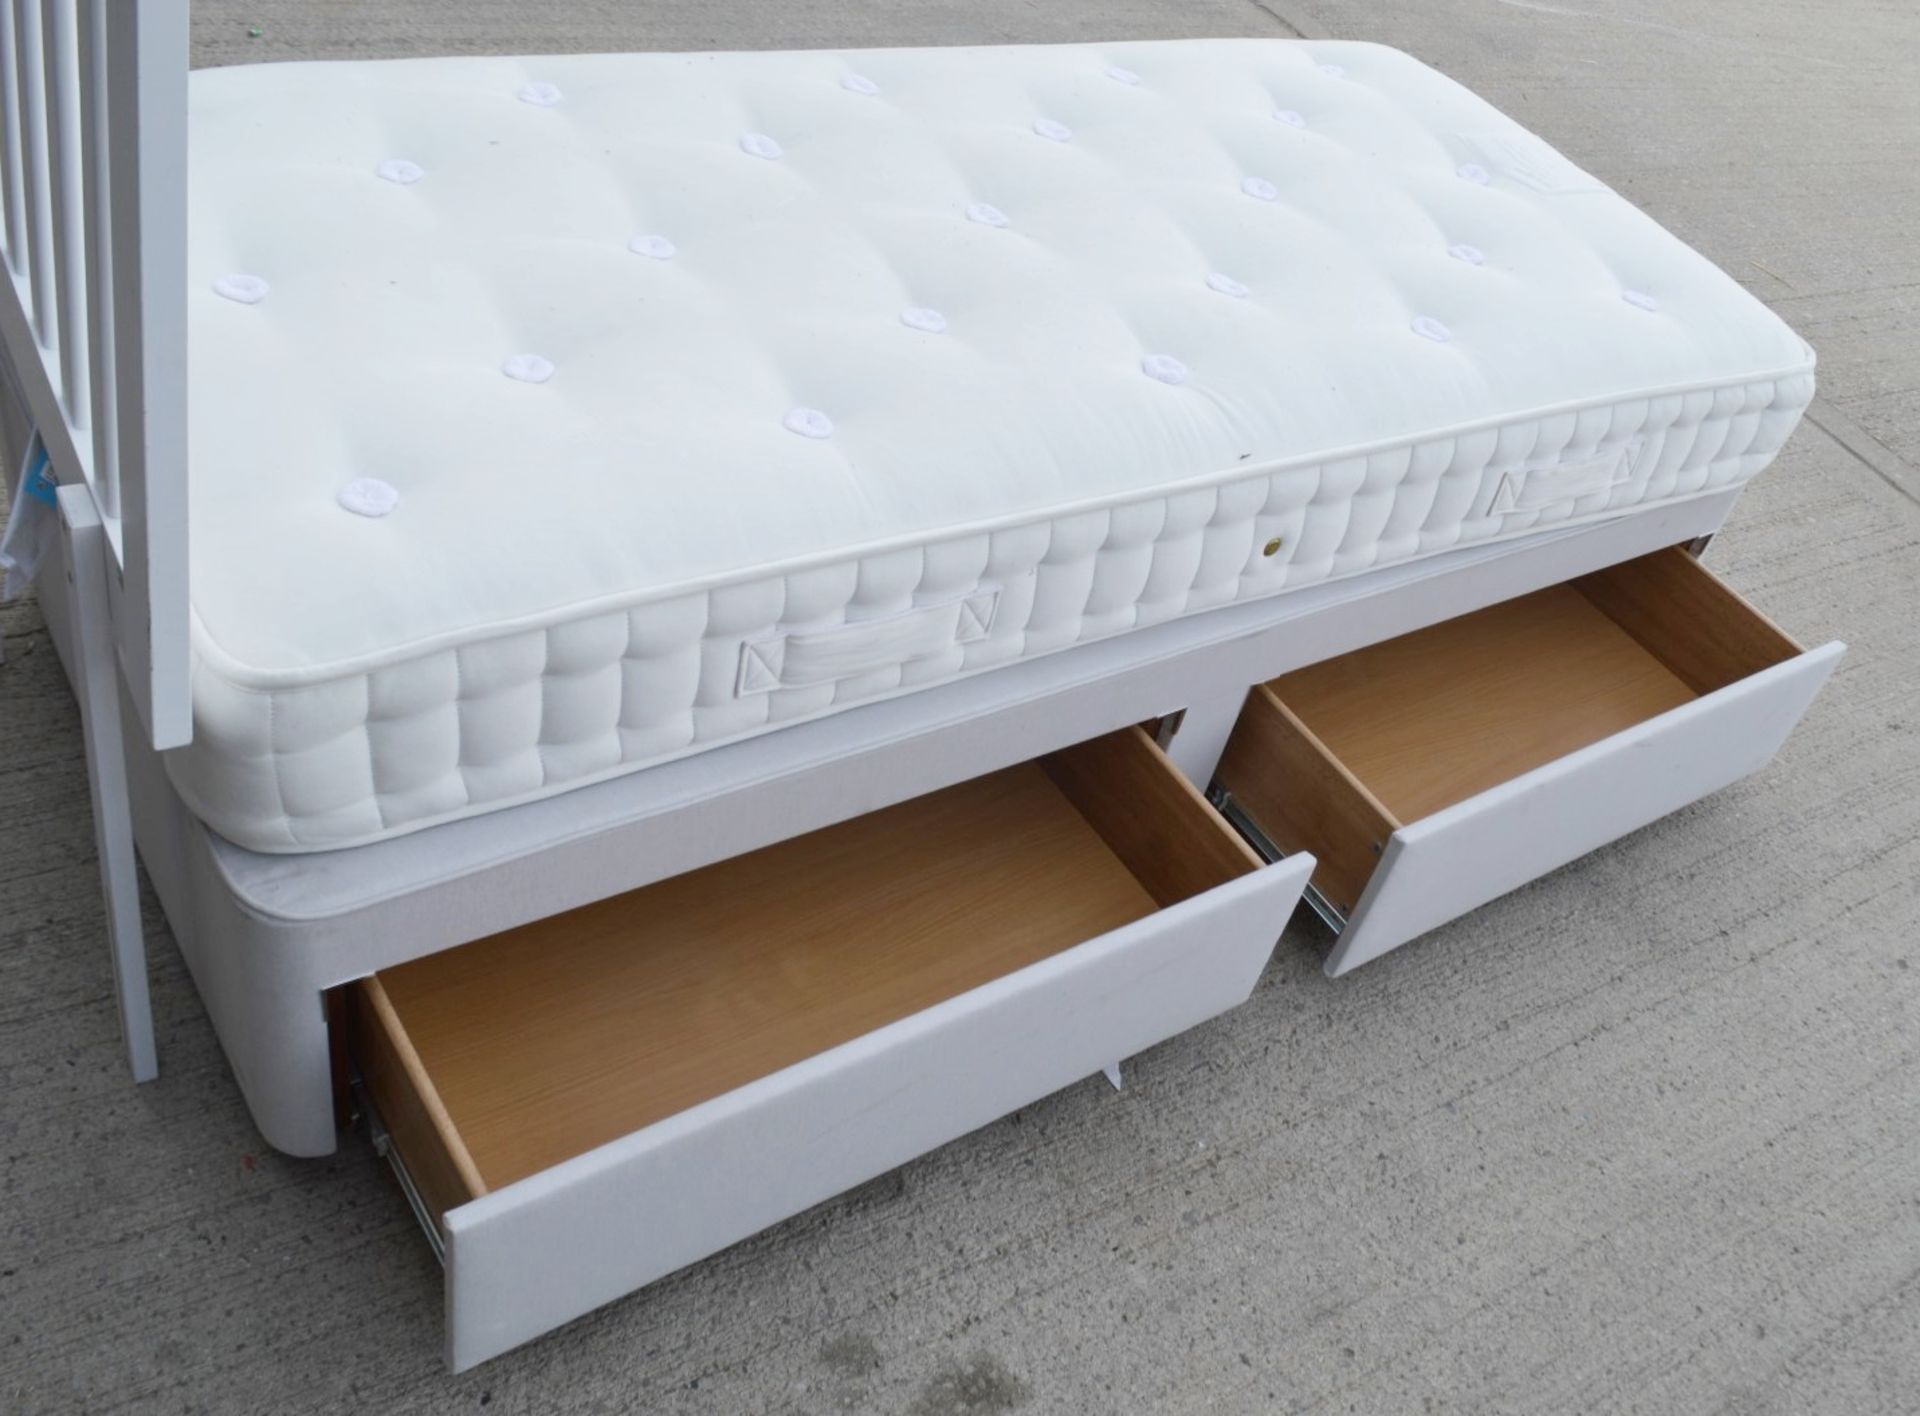 1 x Single JOHN LEWIS Bed With Headboard - Preowned, From An Exclusive Property - Dimensions: W90 - Image 3 of 8